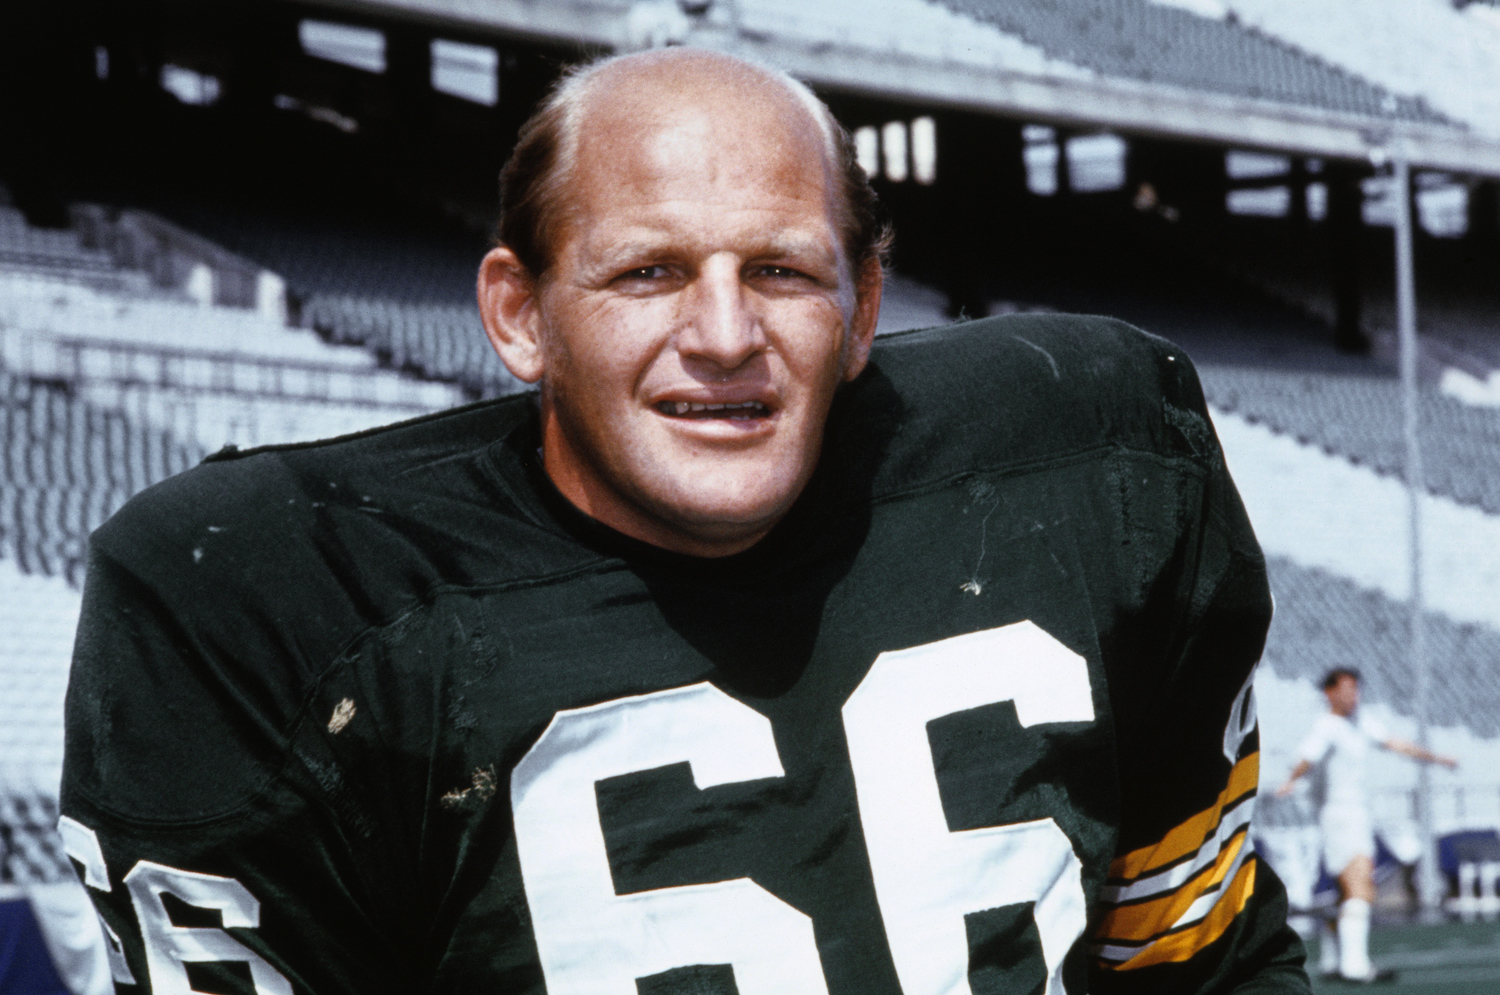 Ray Nitschke won five NFL titles and was inducted into the Hall of Fame, but his death in 1998 rocked the Packers organization to its core.